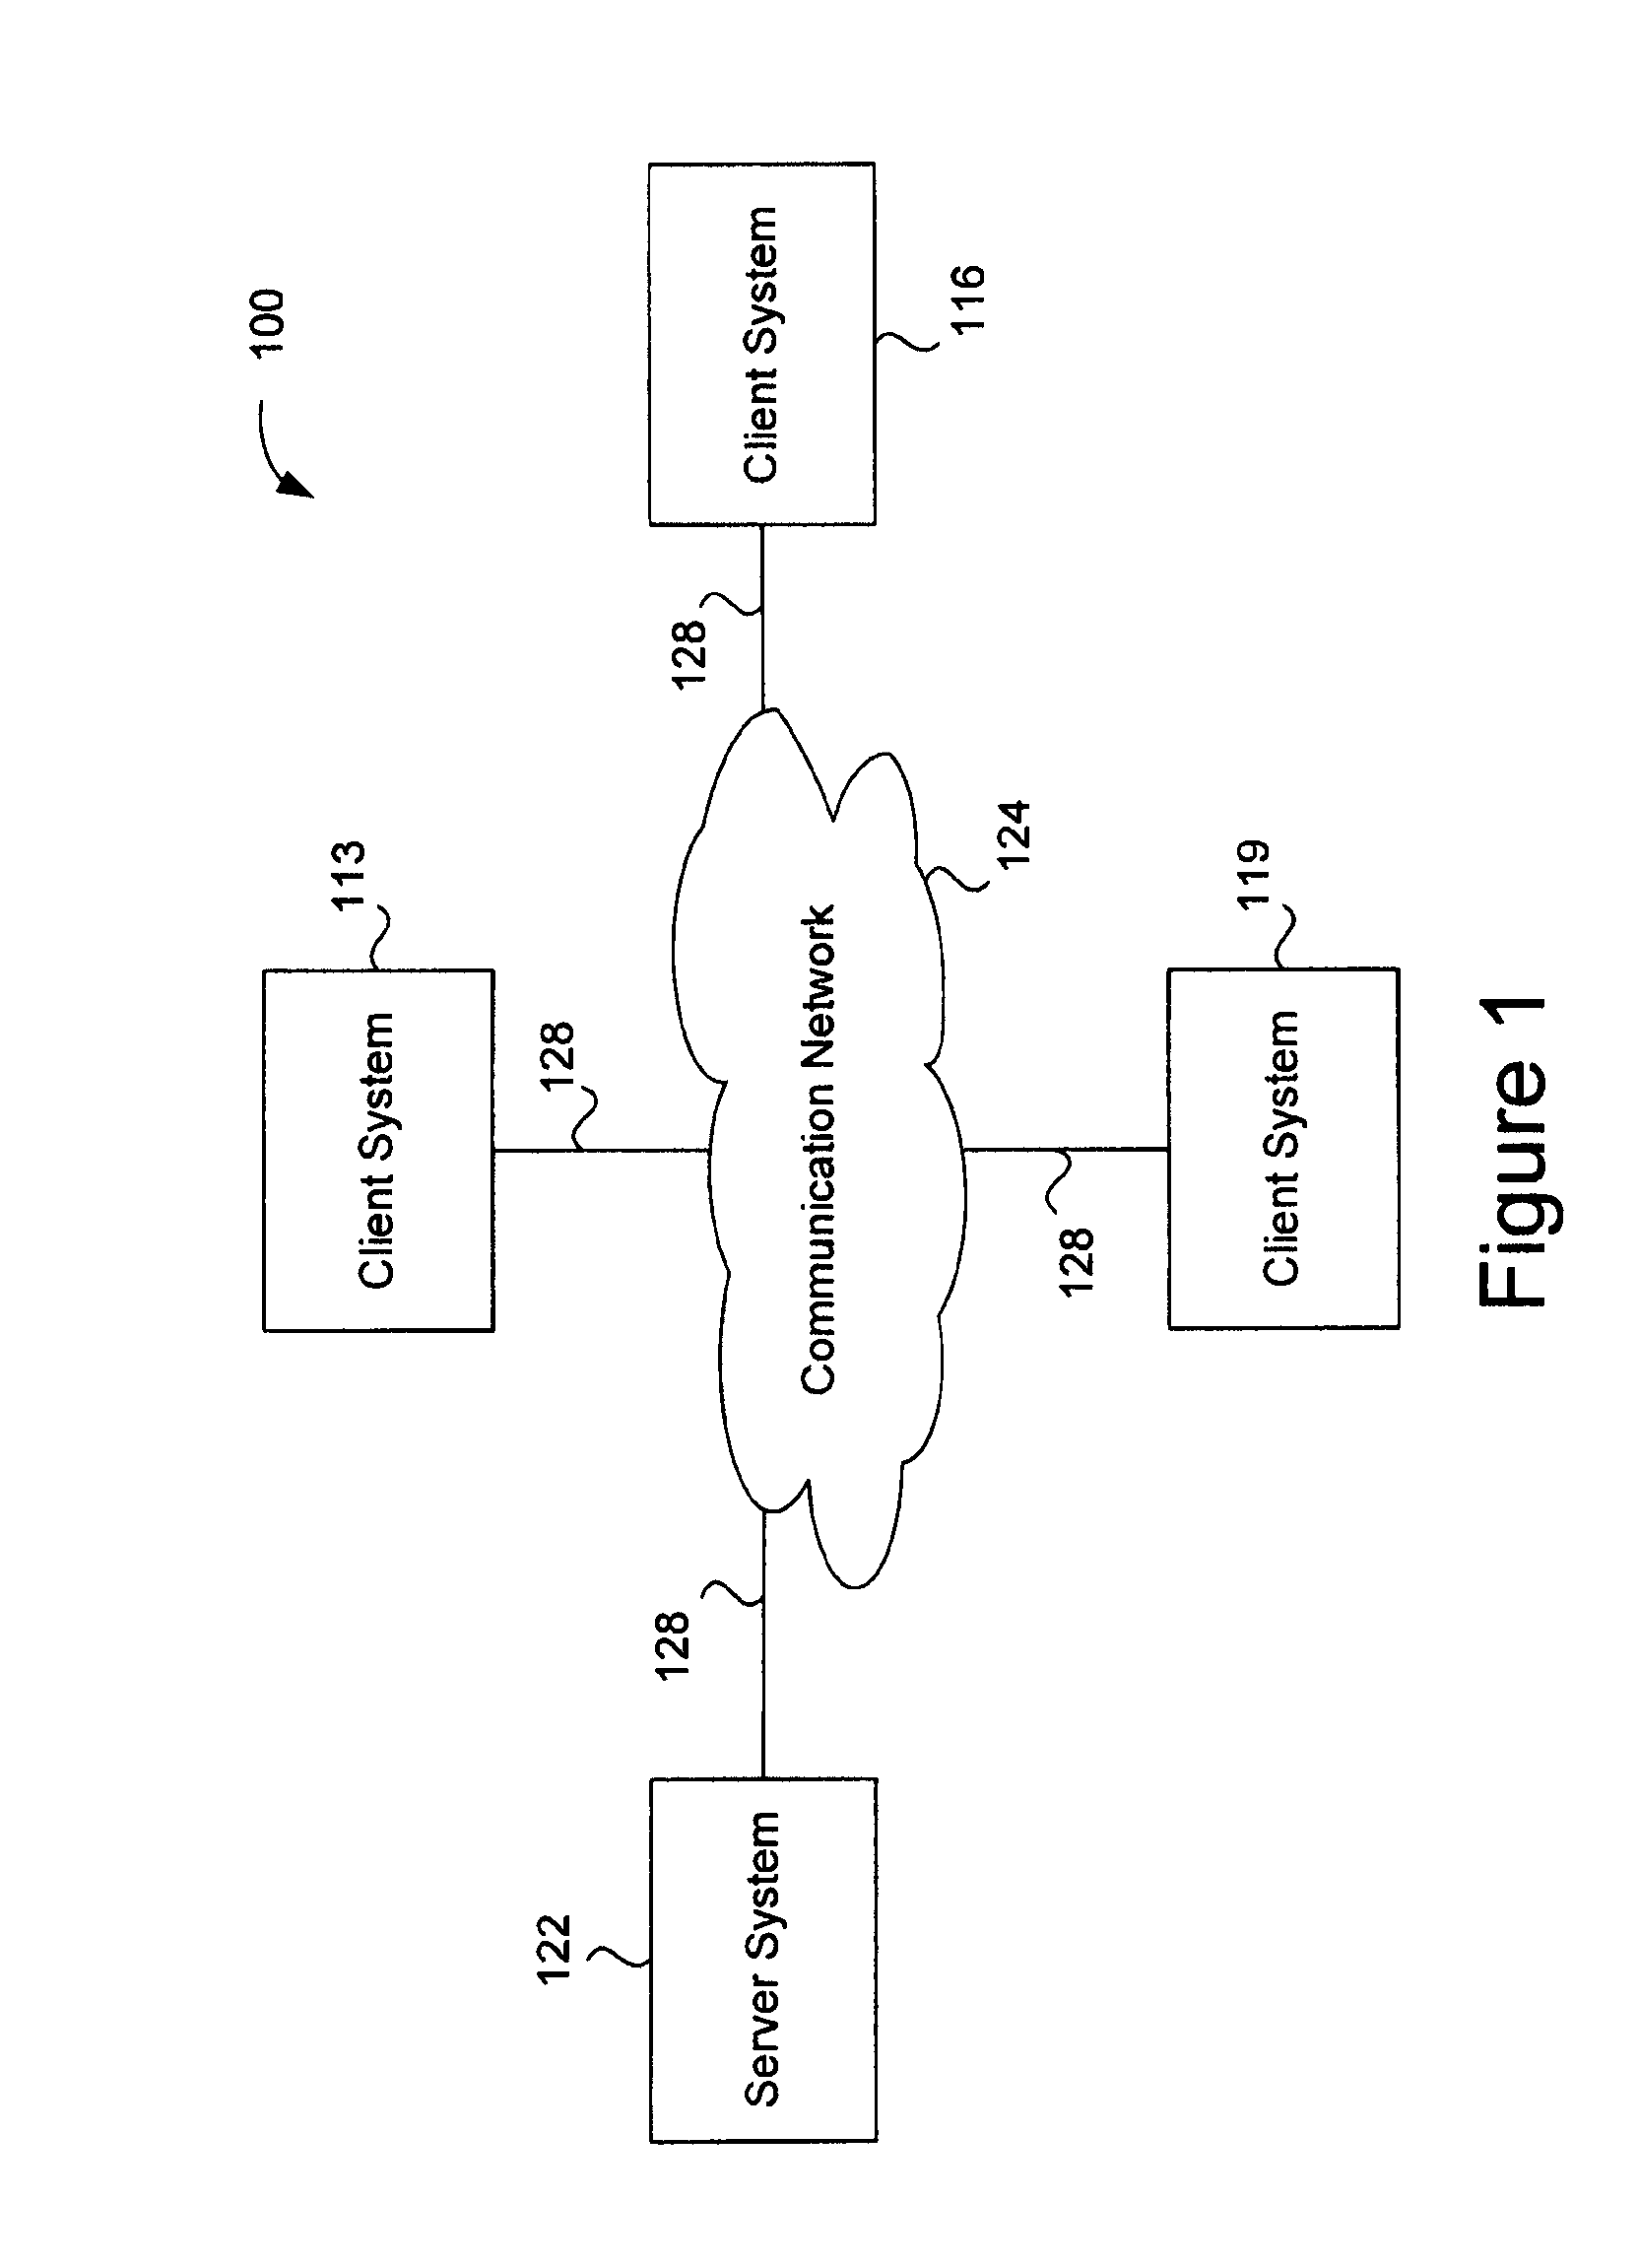 Systems and methods for providing user interactions with media